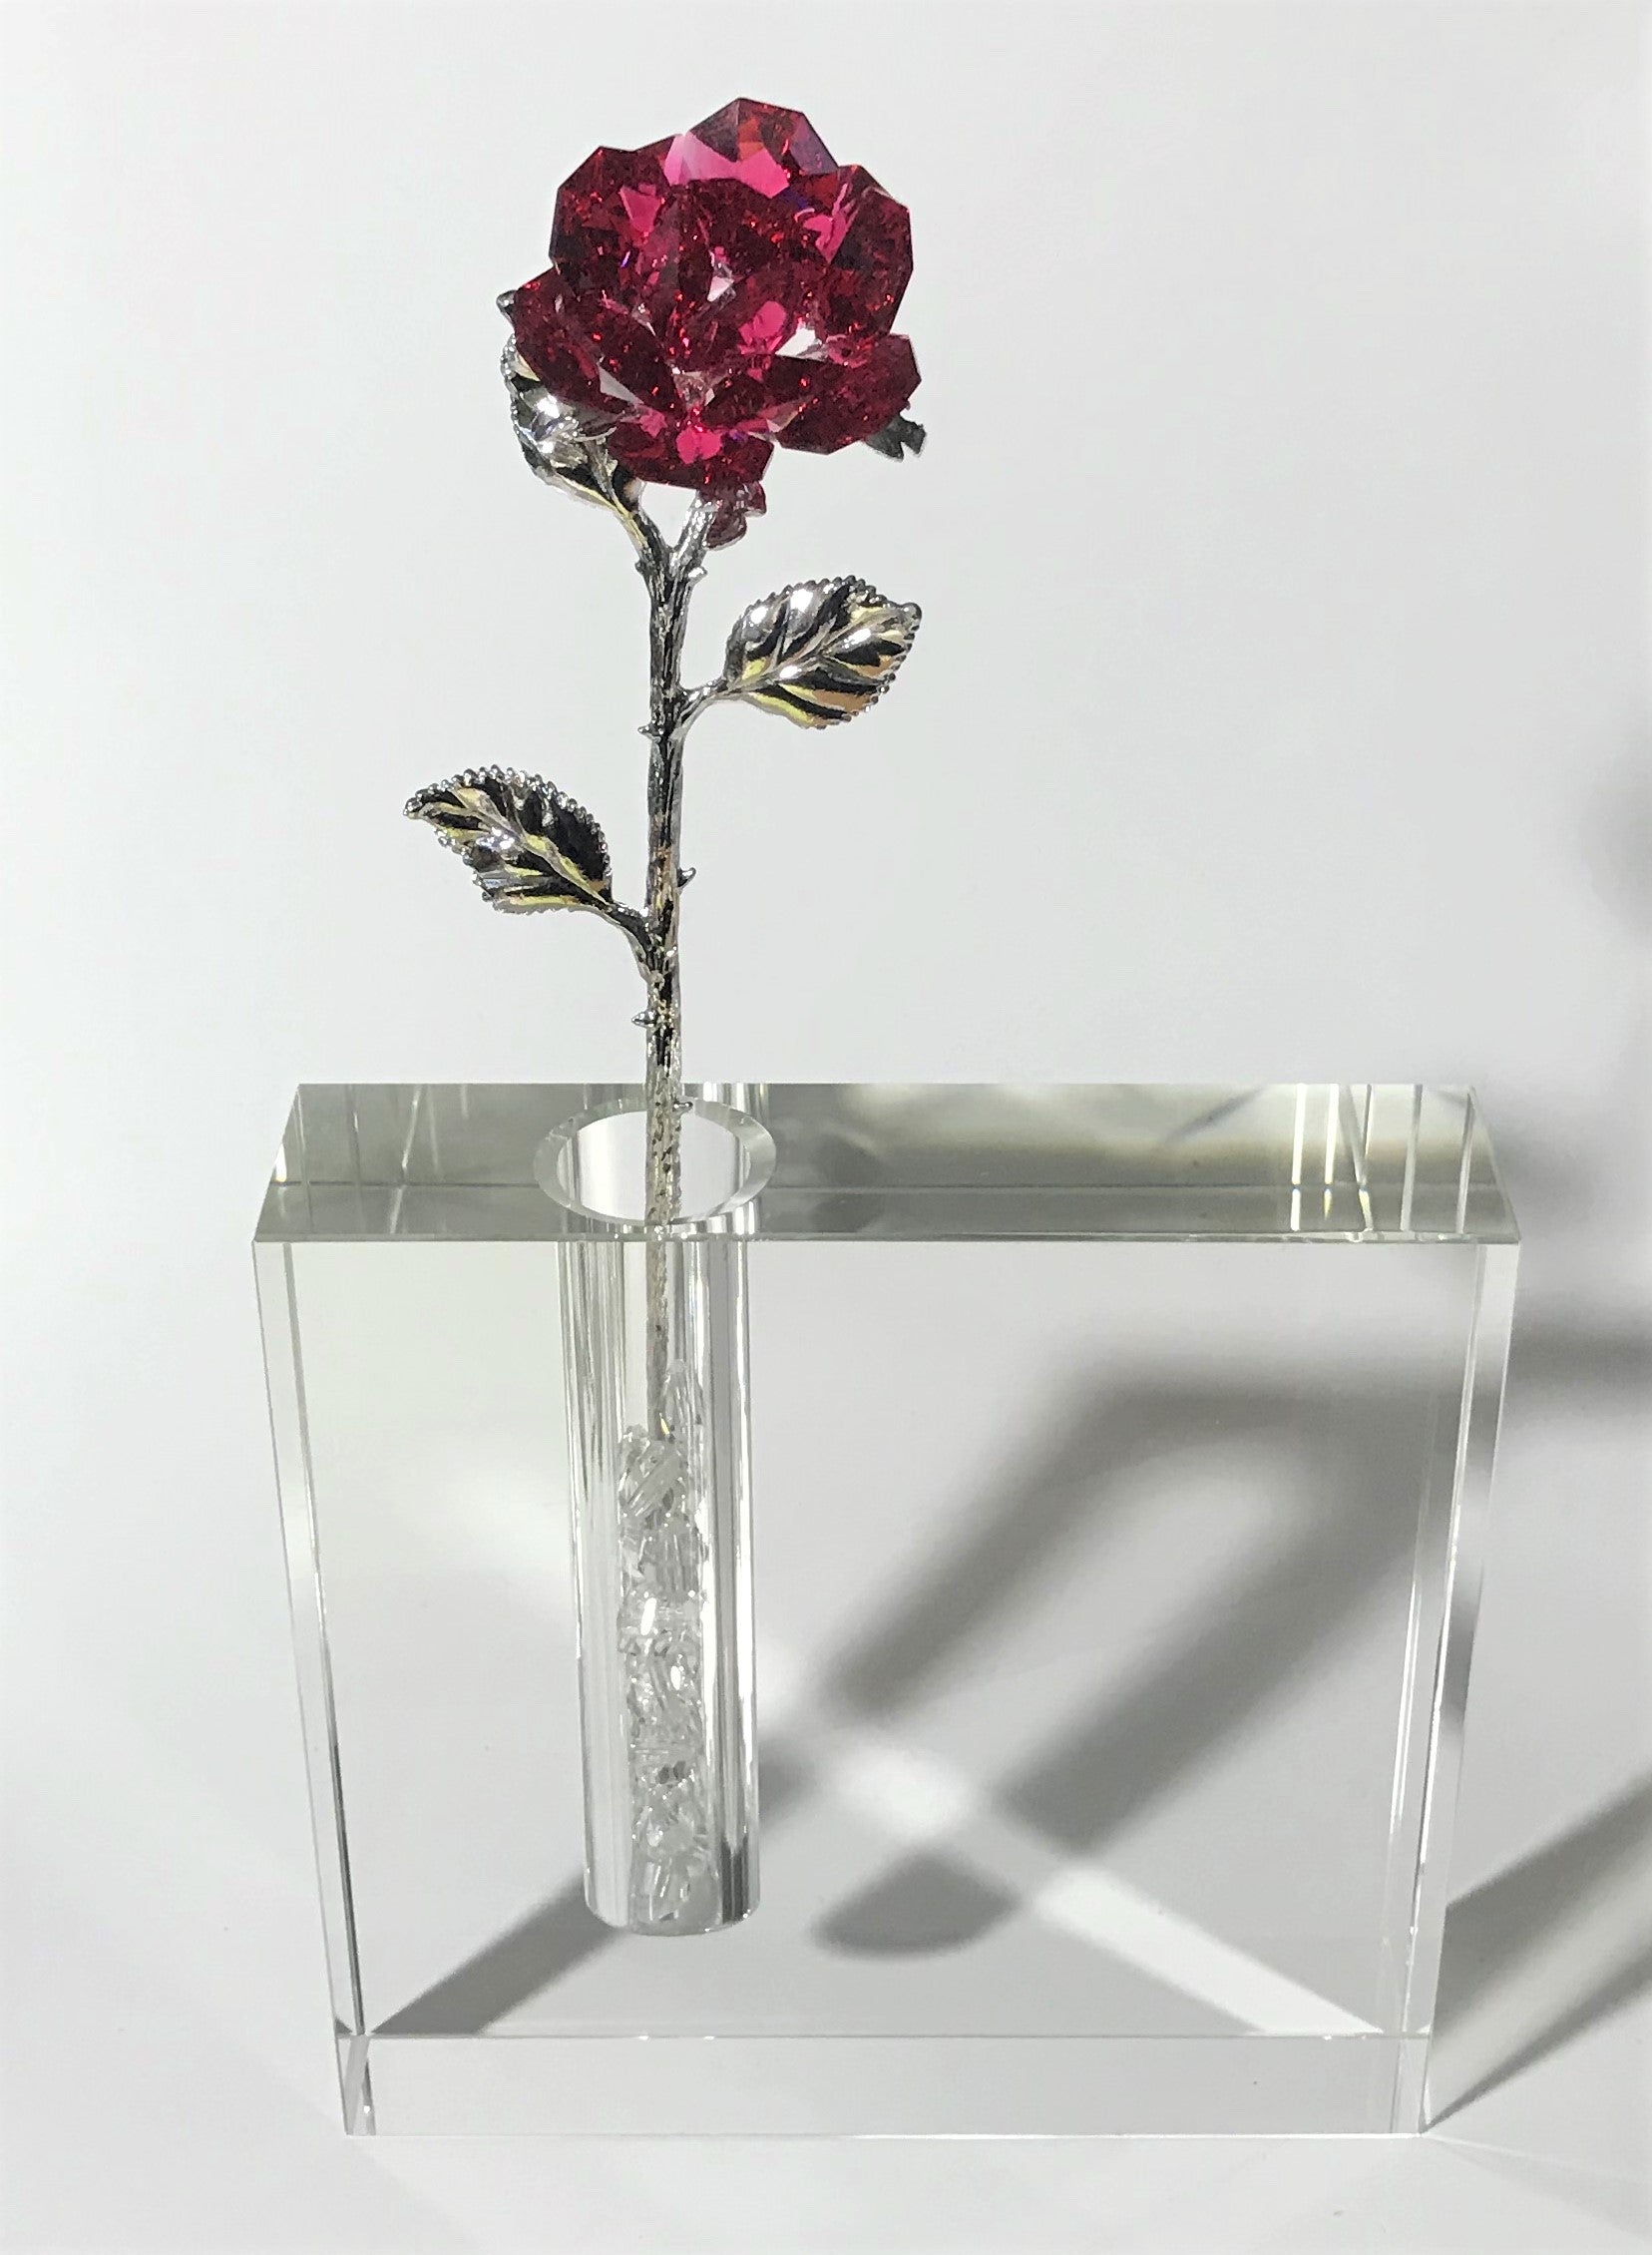 Red Crystal Rose In 5 Inch Square Crystal Vase - Red Crystal Flower In Crystal Vase